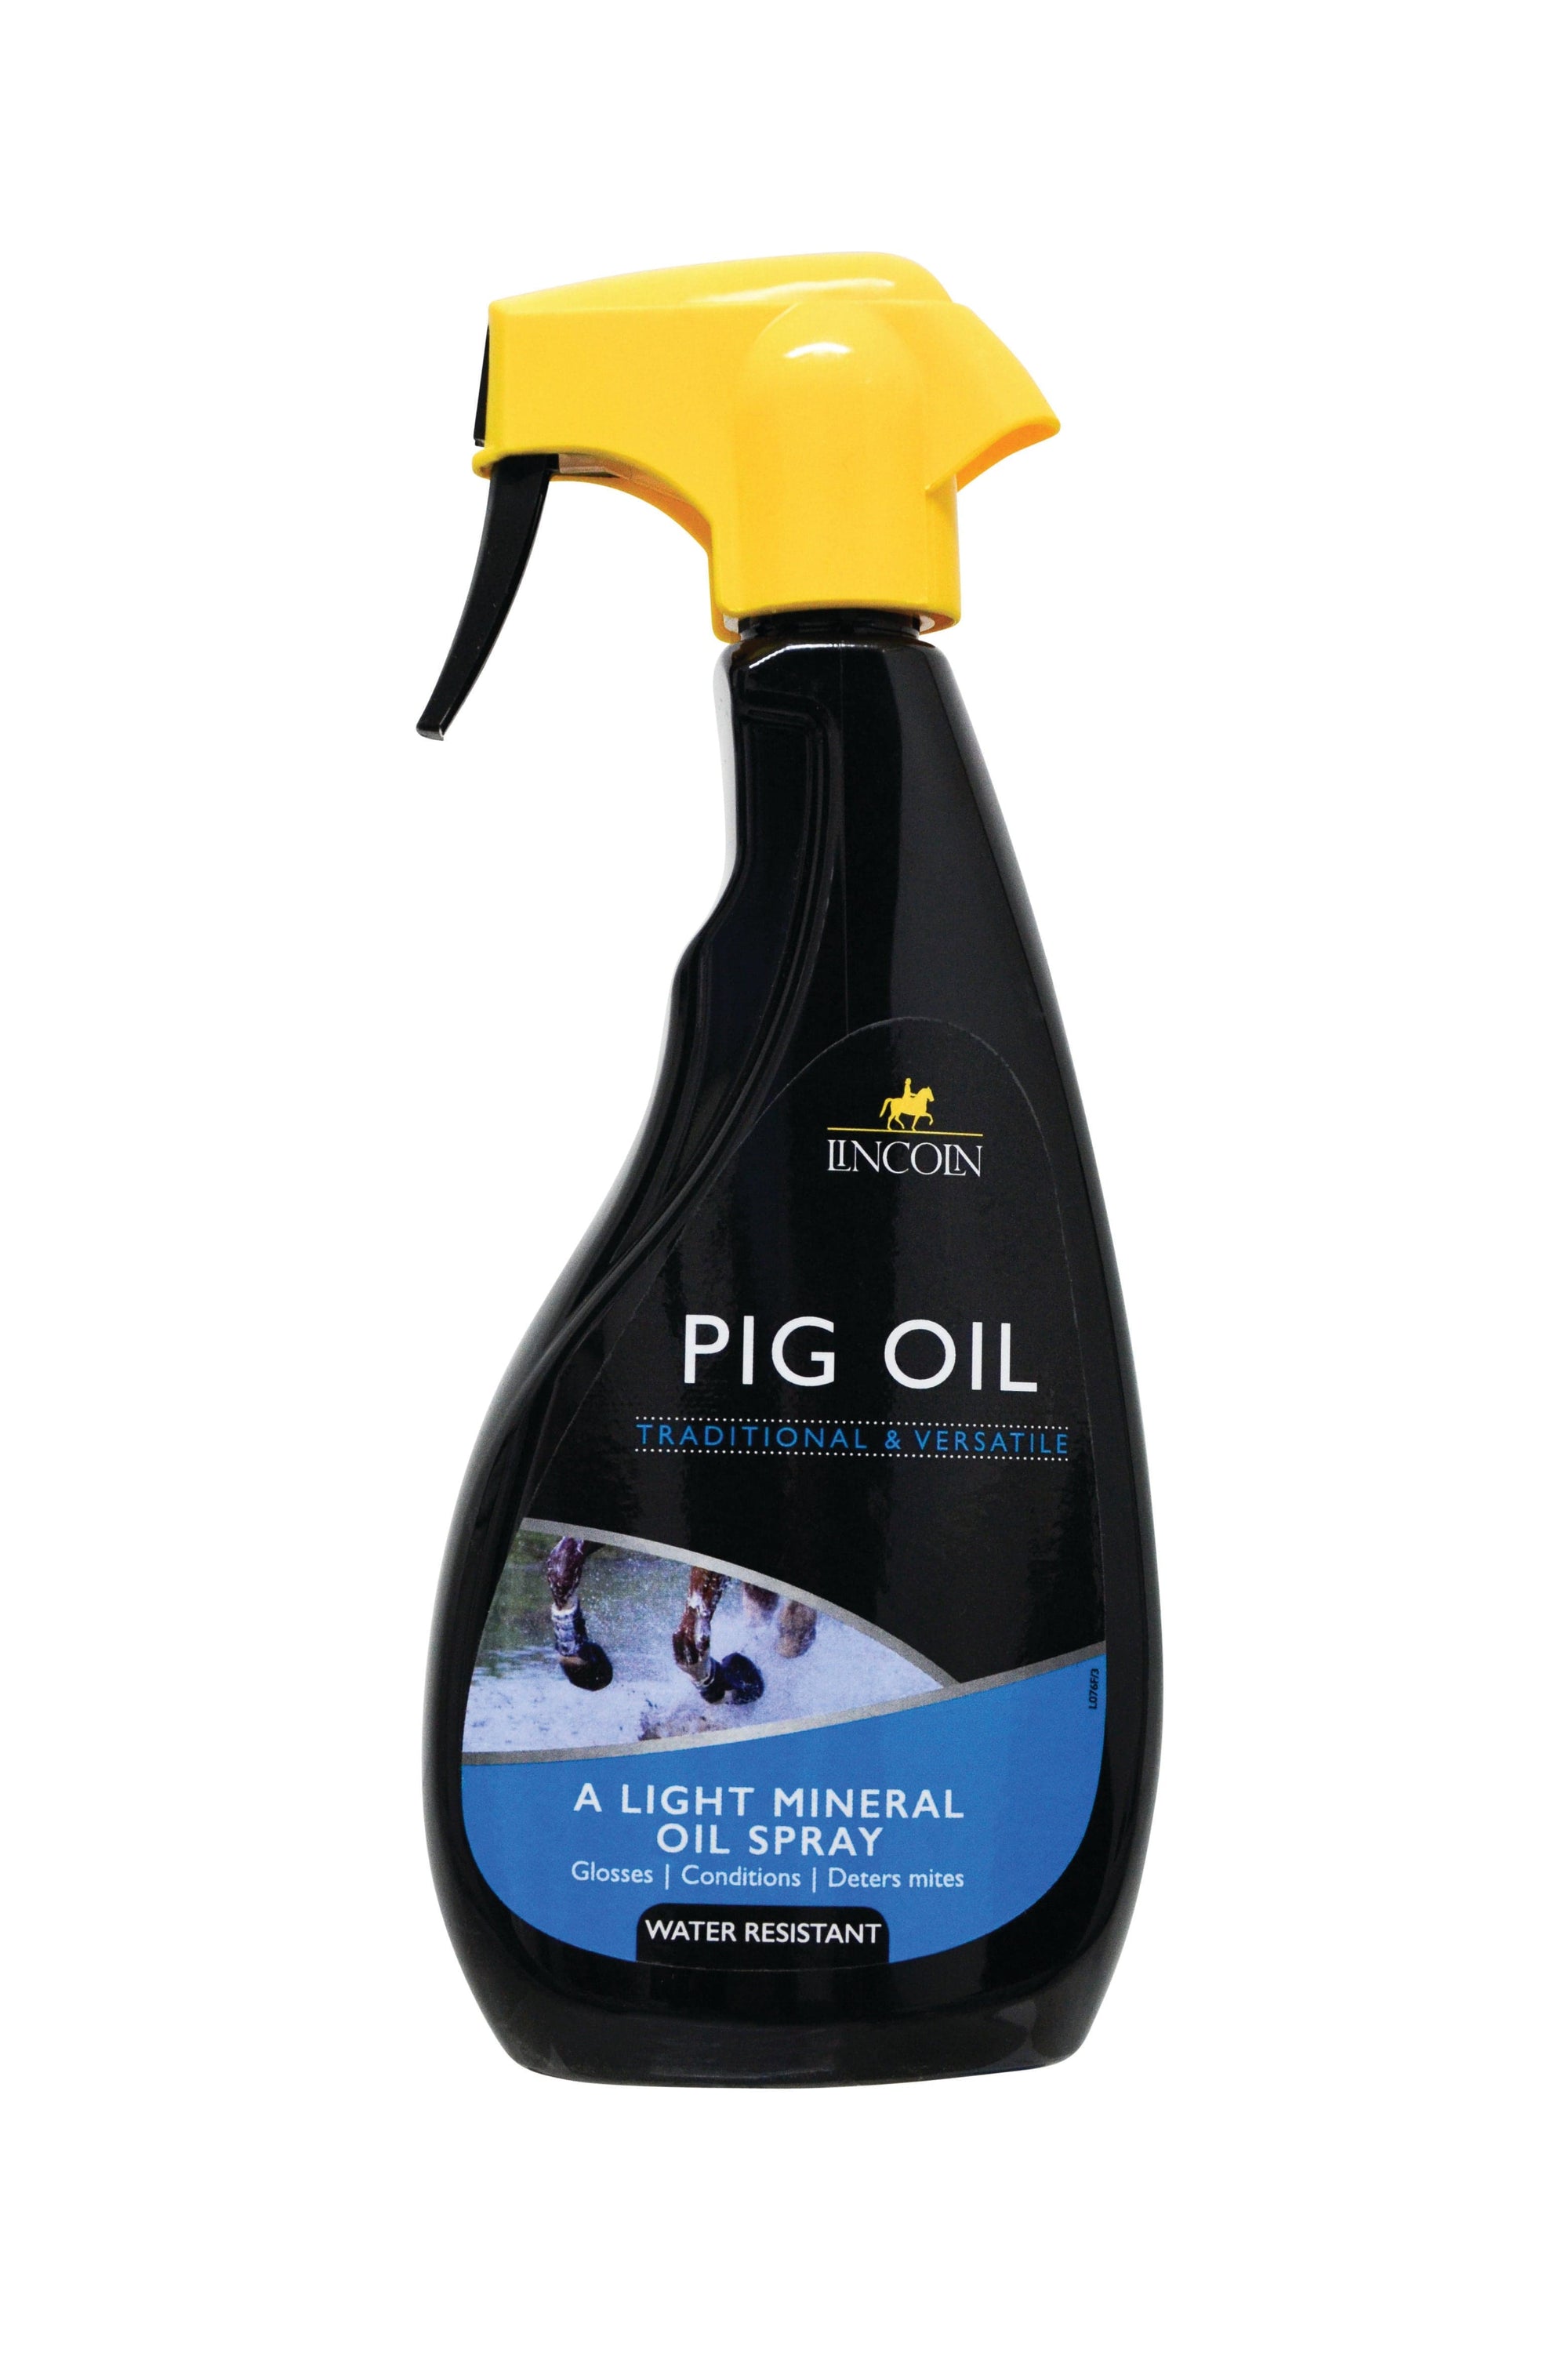 Lincoln pig oil